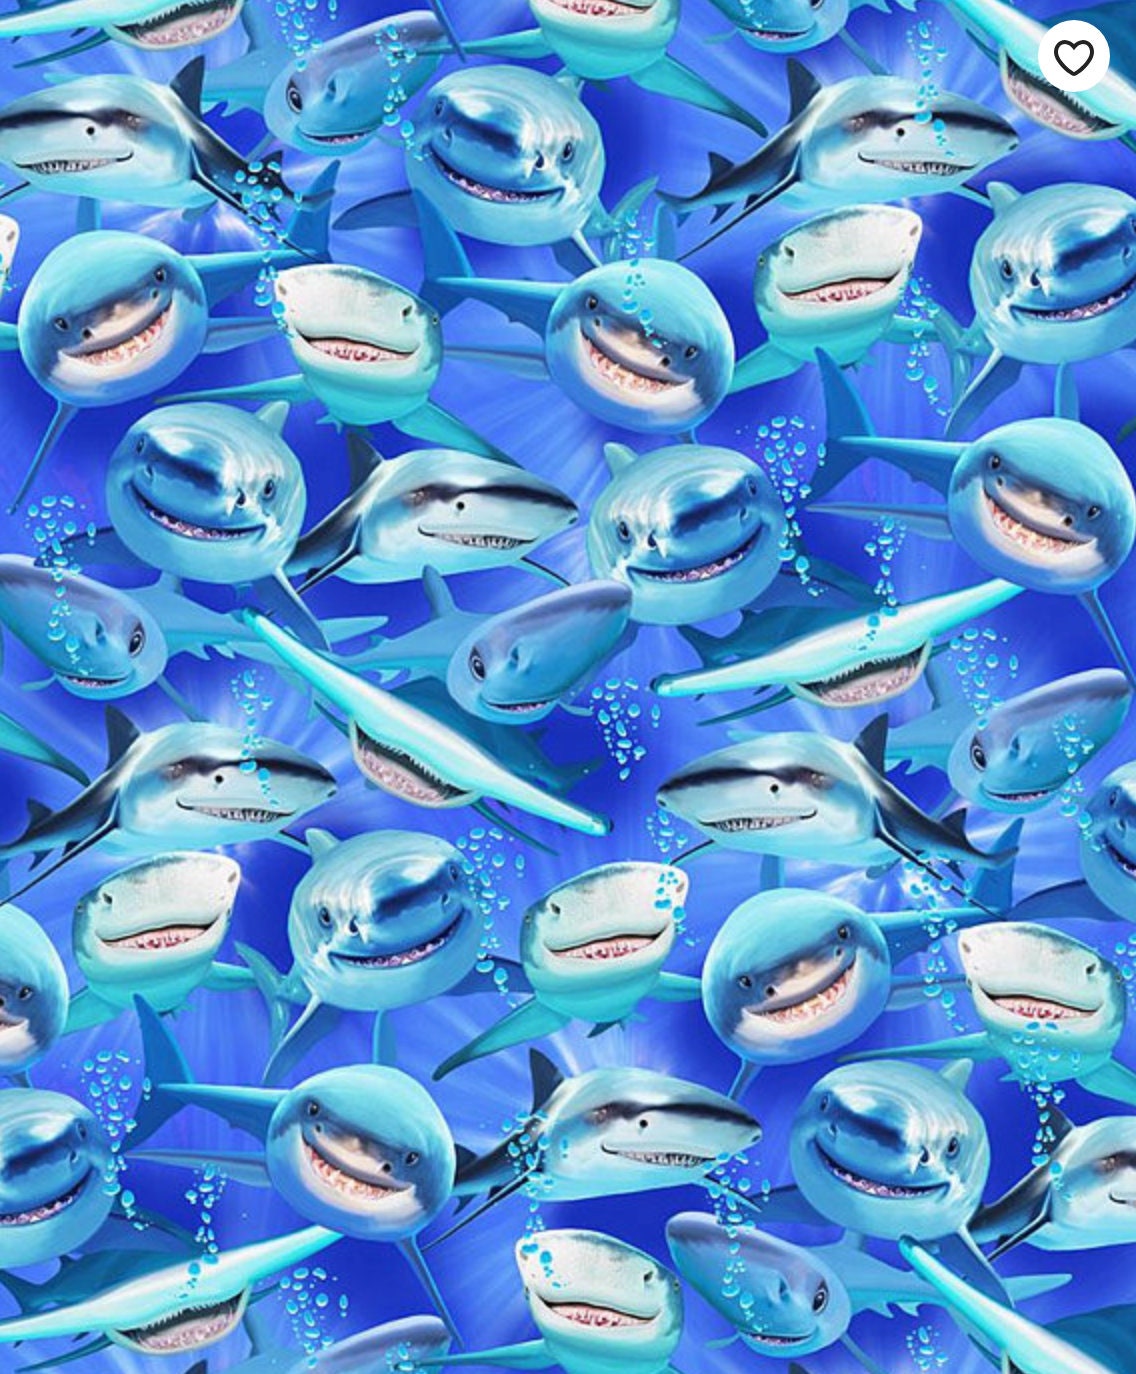 Shark Attack, Weighted Blanket, Cotton, Up to Twin Size, 3 to 20 Pounds